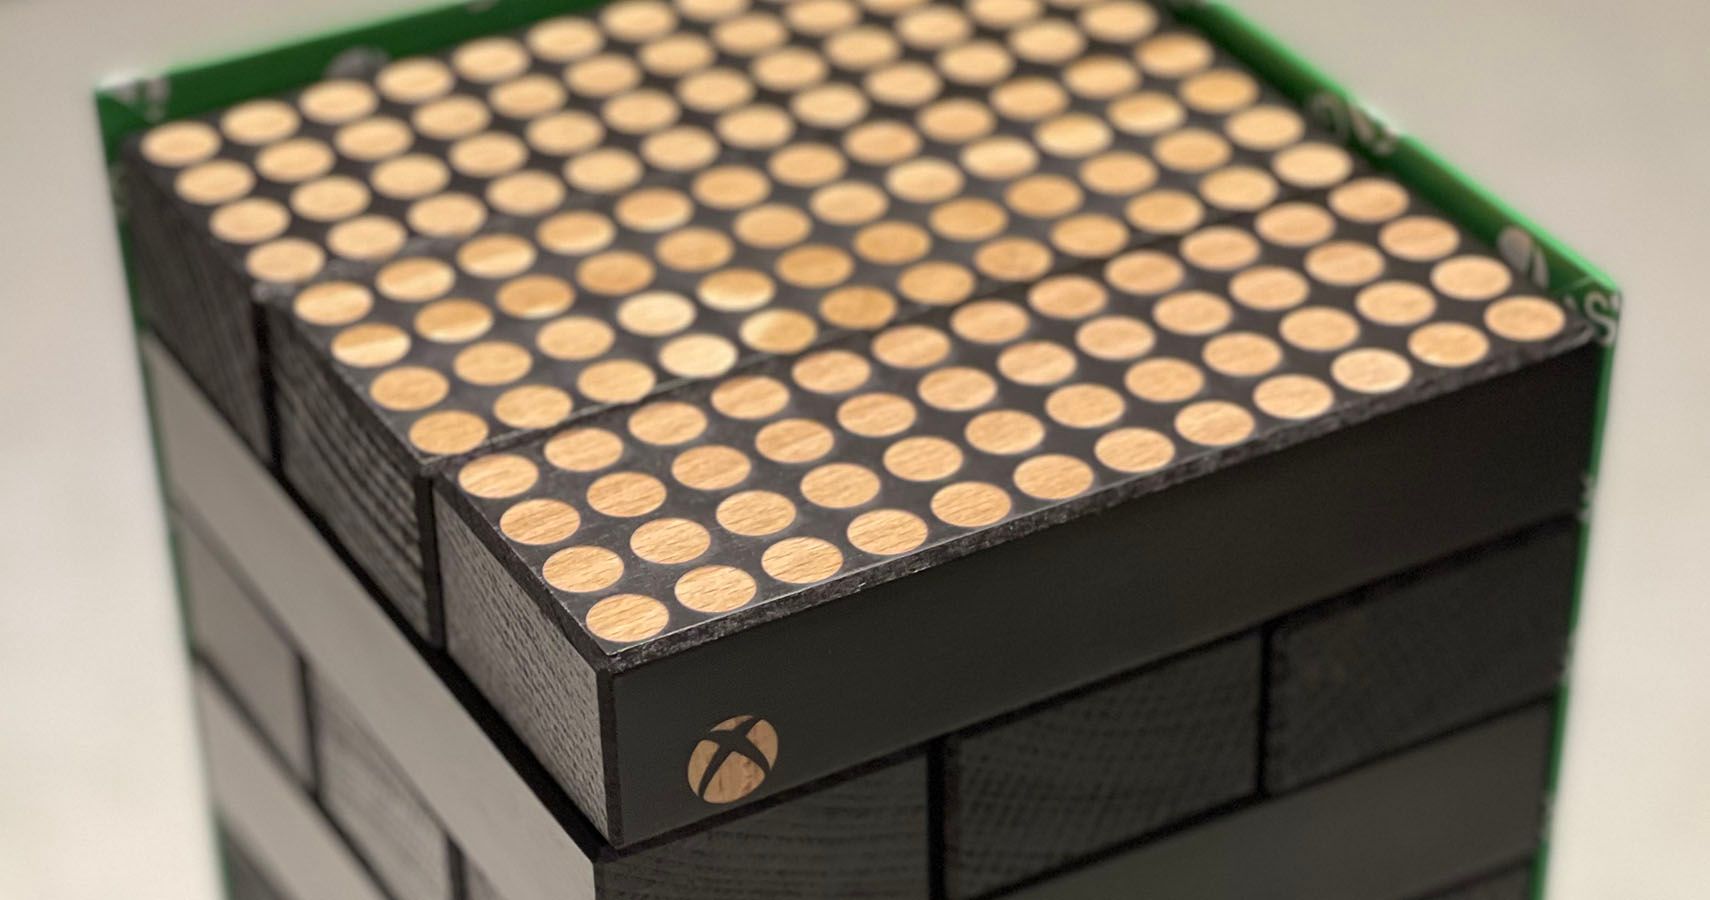 A picture of the Xbox Series X Jenga set.